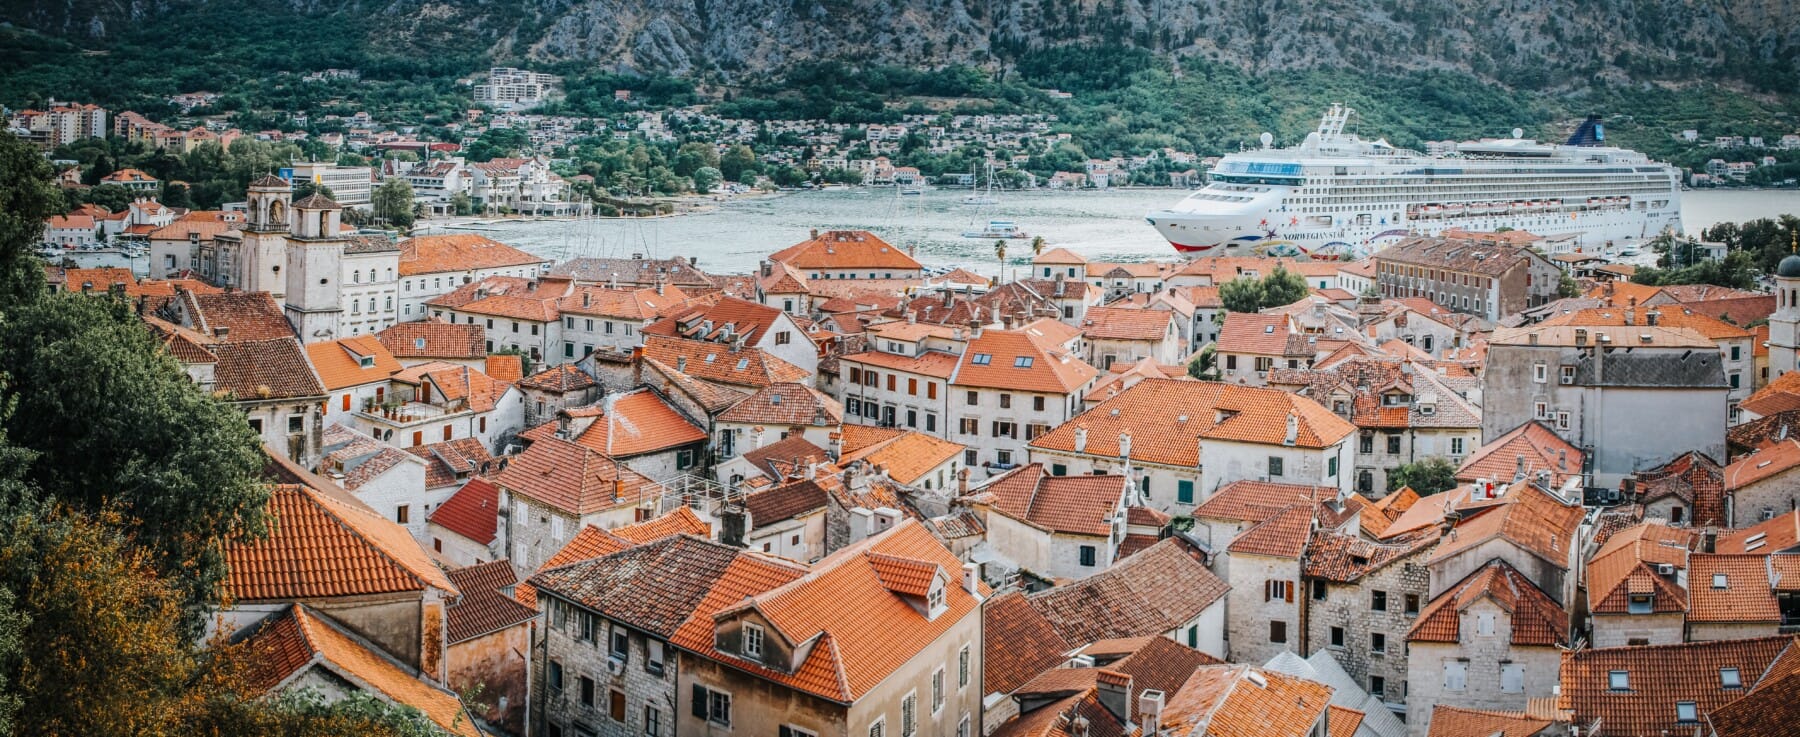 Cityscape of Kotor old town and cruseirship anchored in the Bay of Kotor in Montenegro